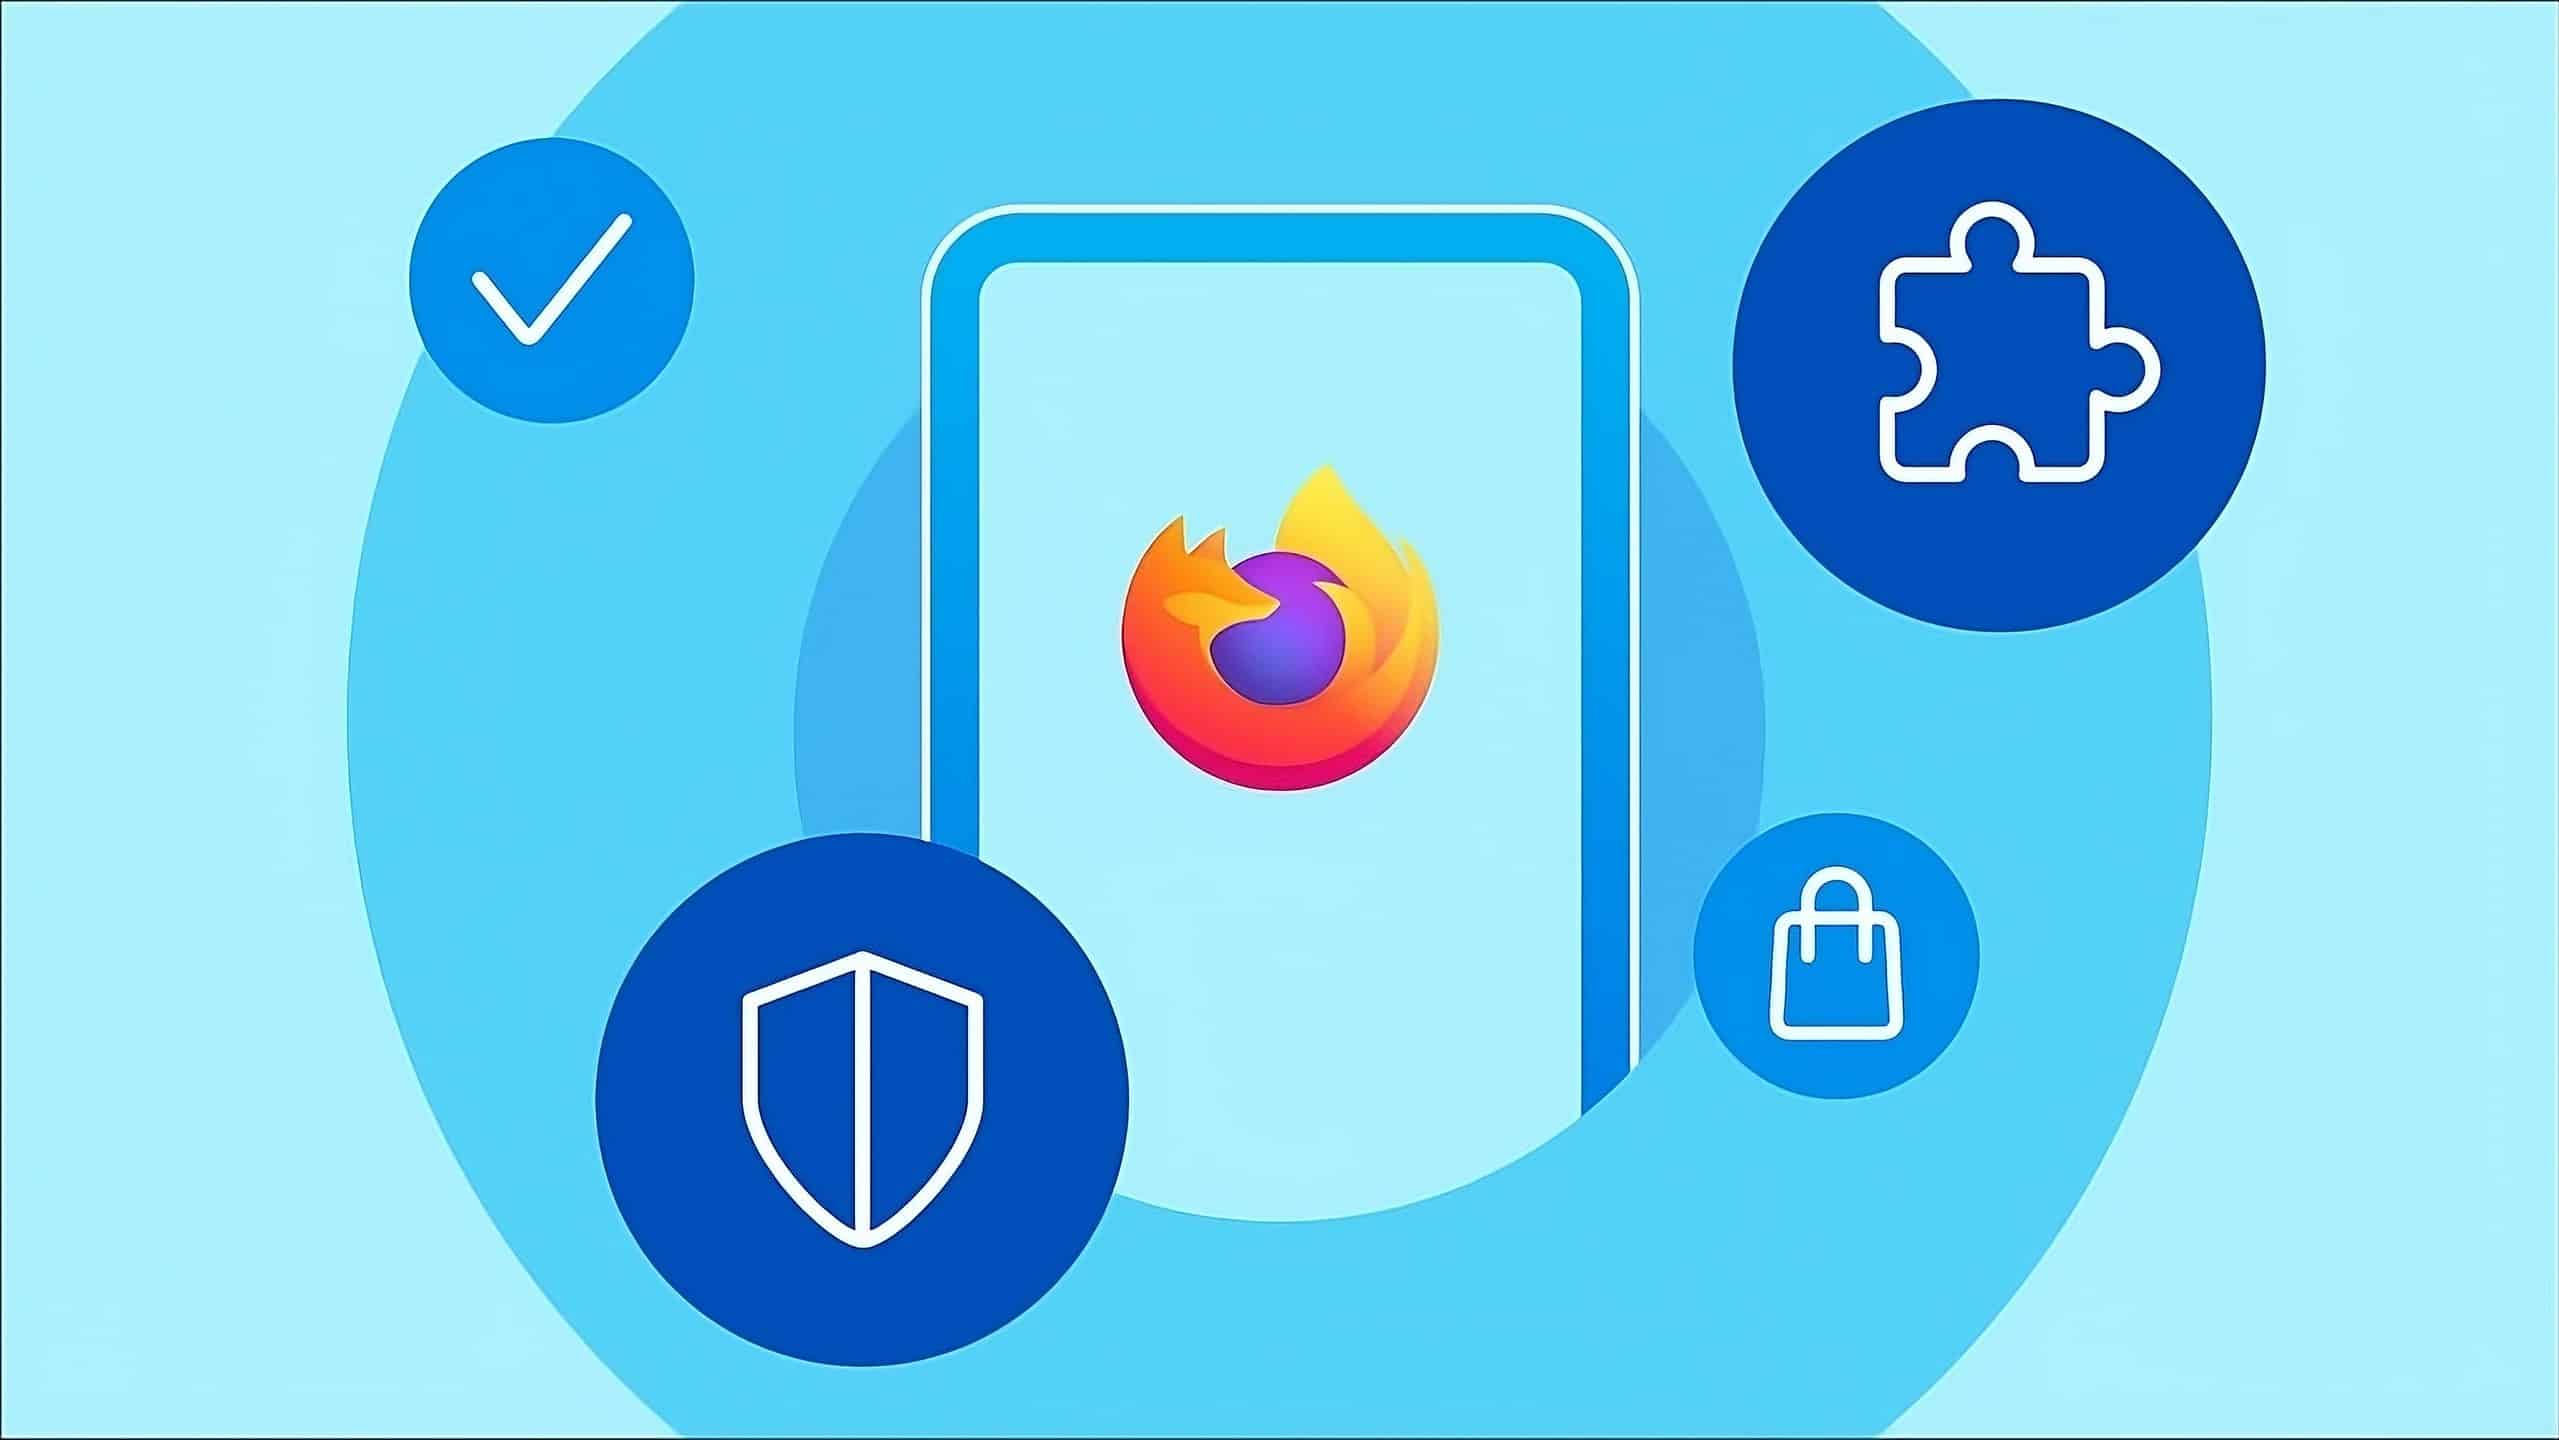 Firefox for Android now supports over 450 extensions